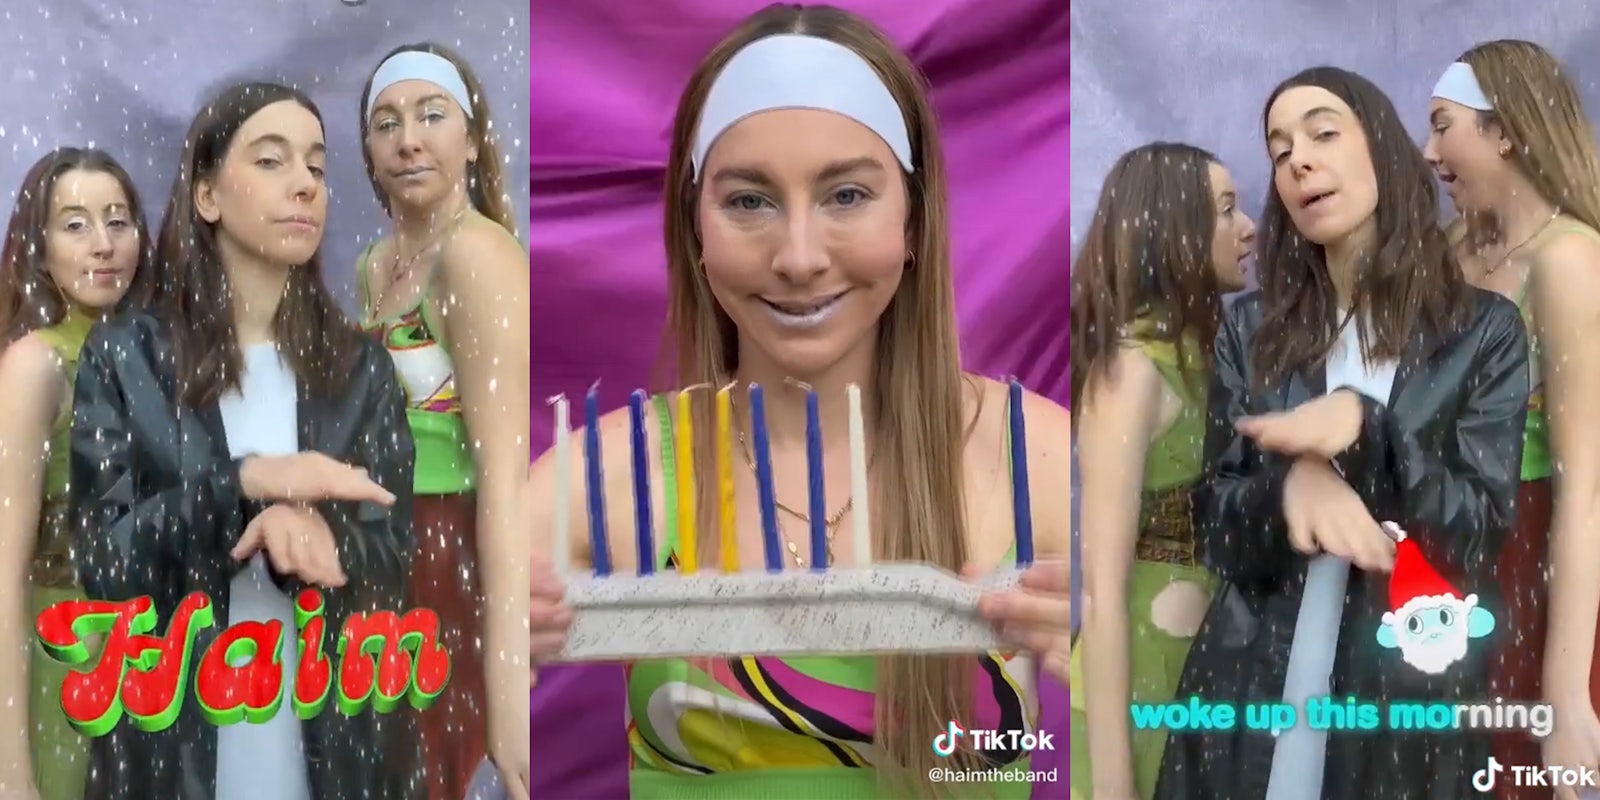 women singing haim song 'christmas wrapping 2020' and a woman holding up a menorah